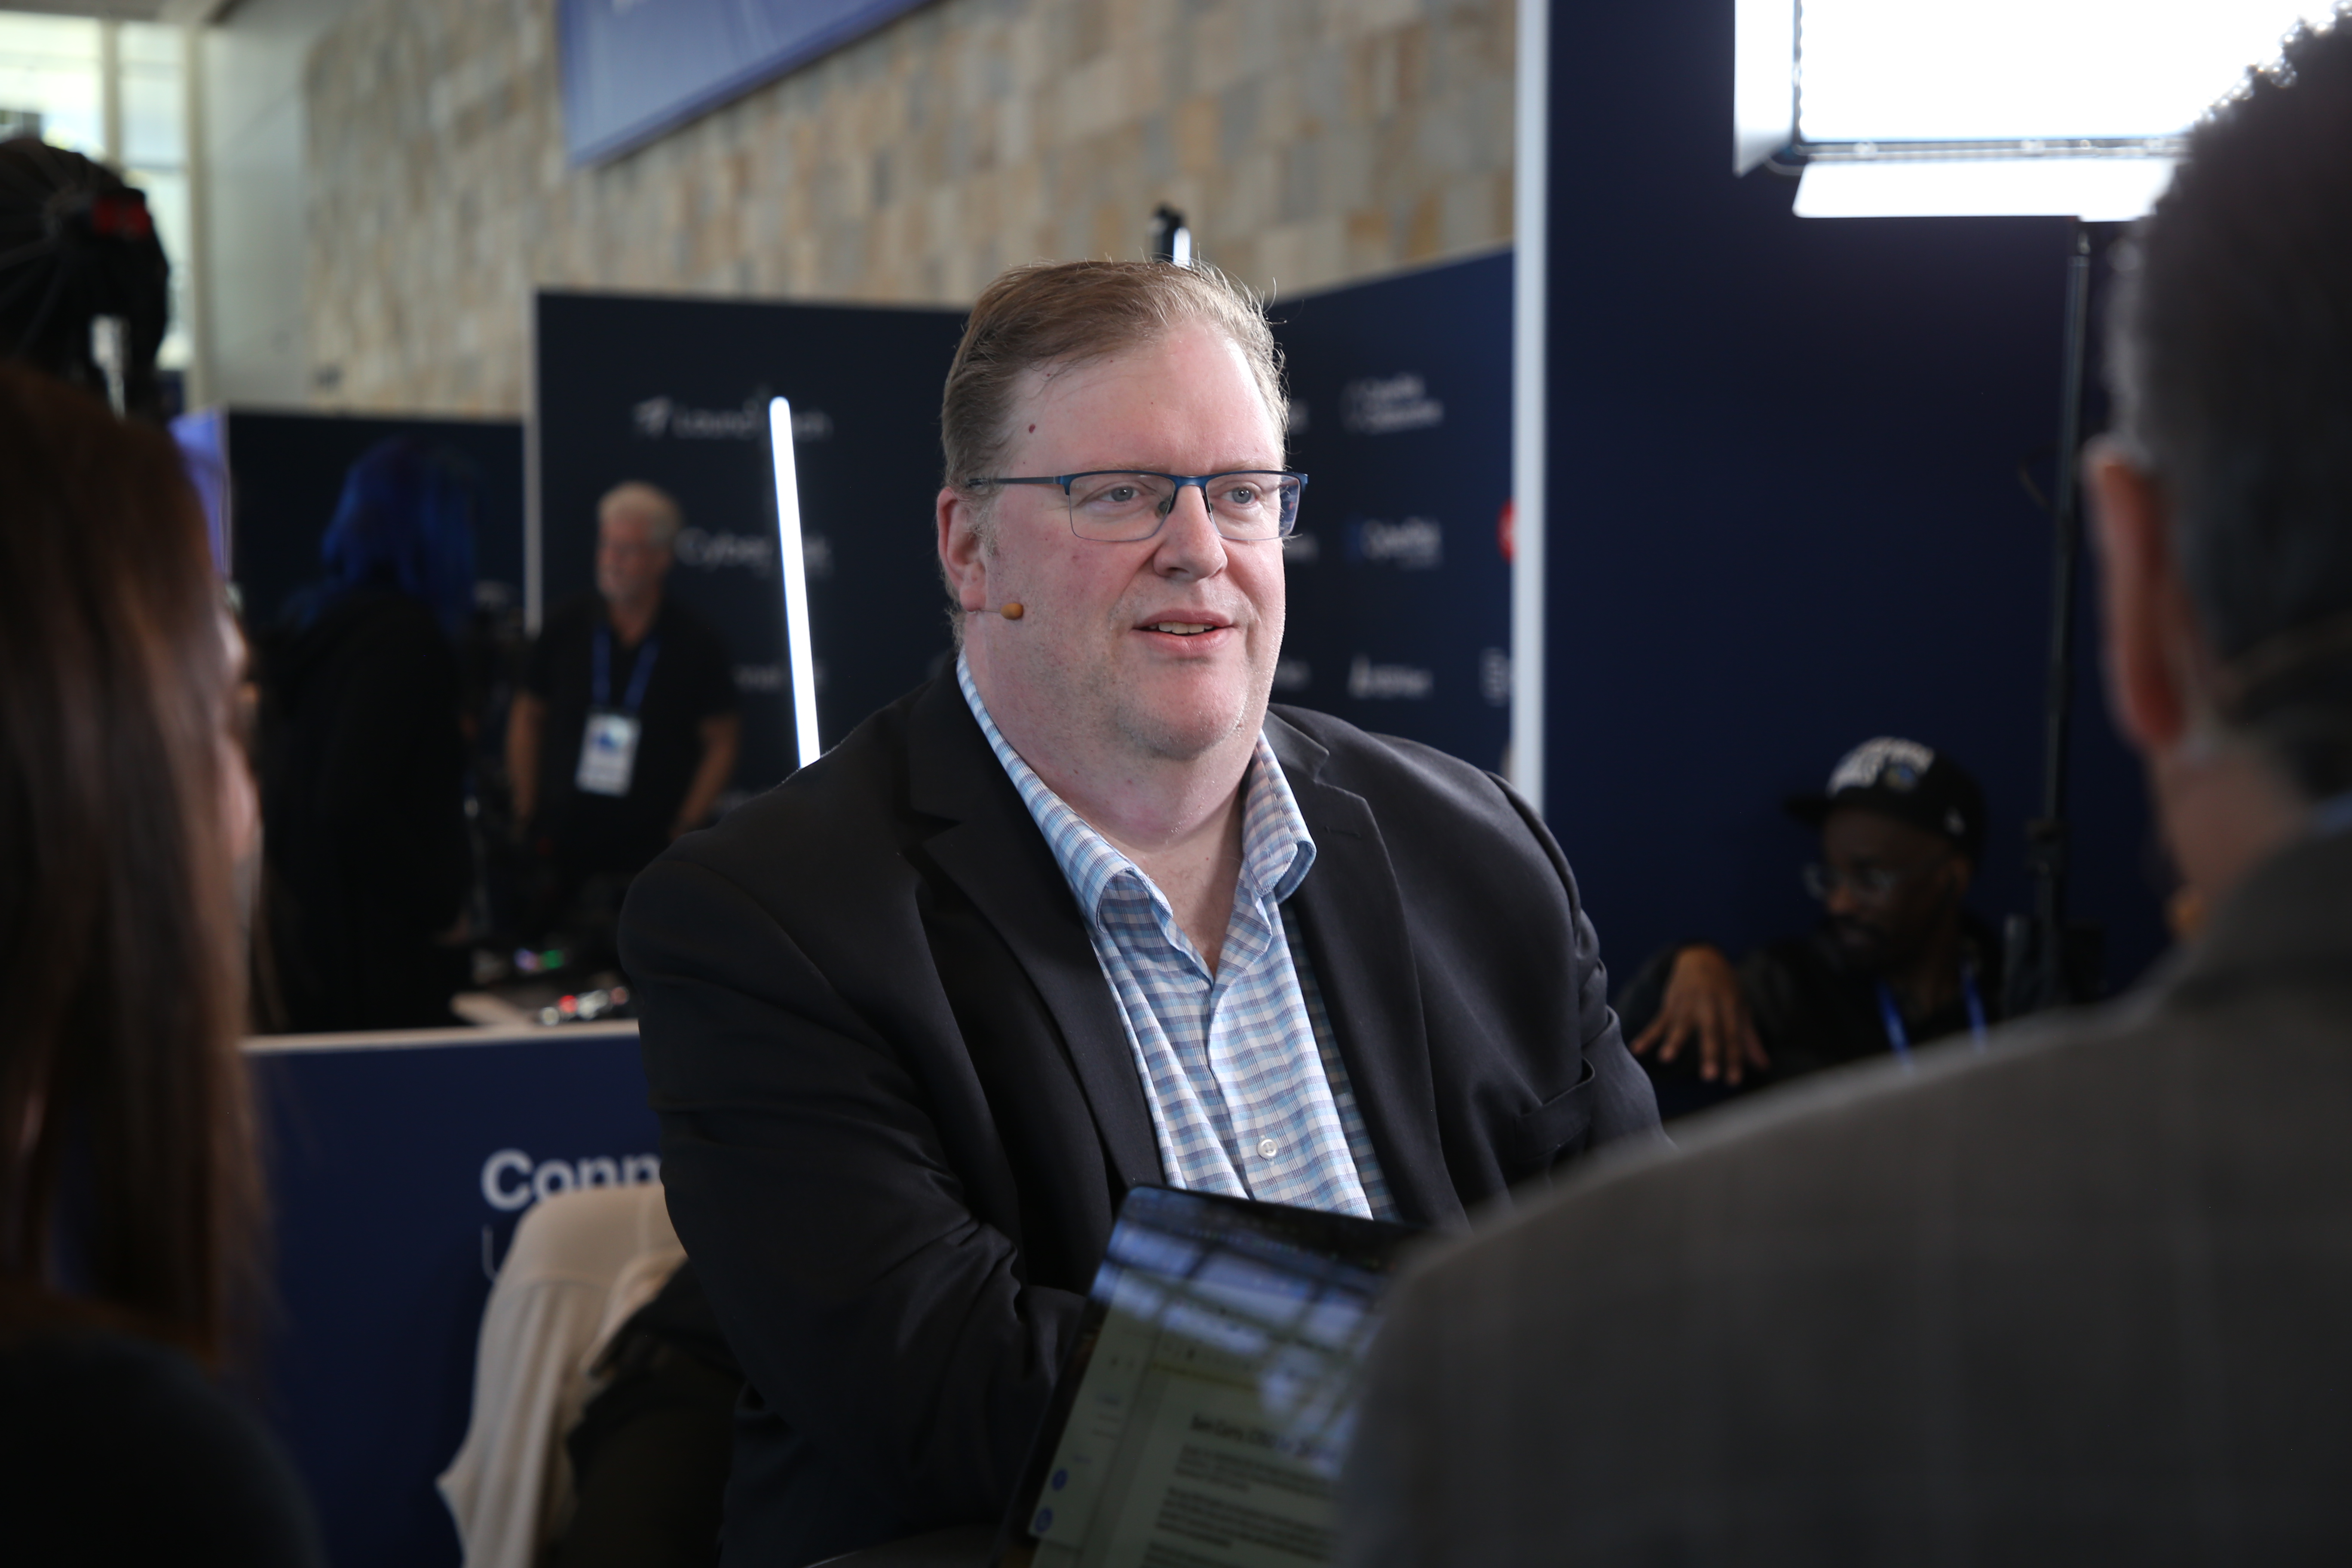 Sam Curry, global vice president and chief information security officer of ZScaler Inc., discussed emerging security challenges during the RSA Conference on May 8.